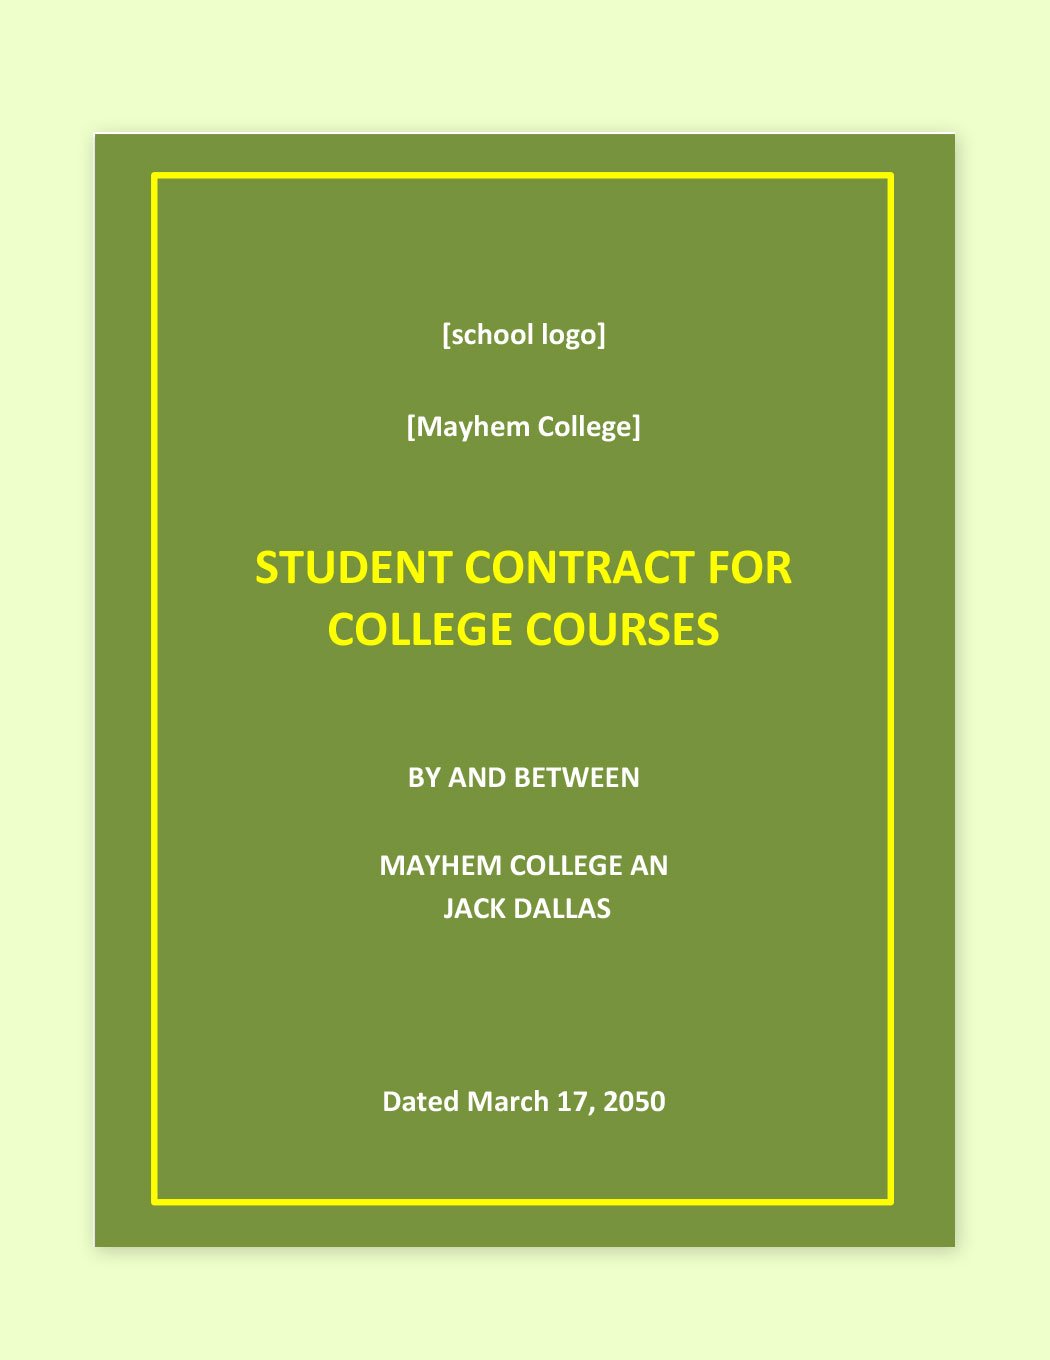 Student Contract For College Courses